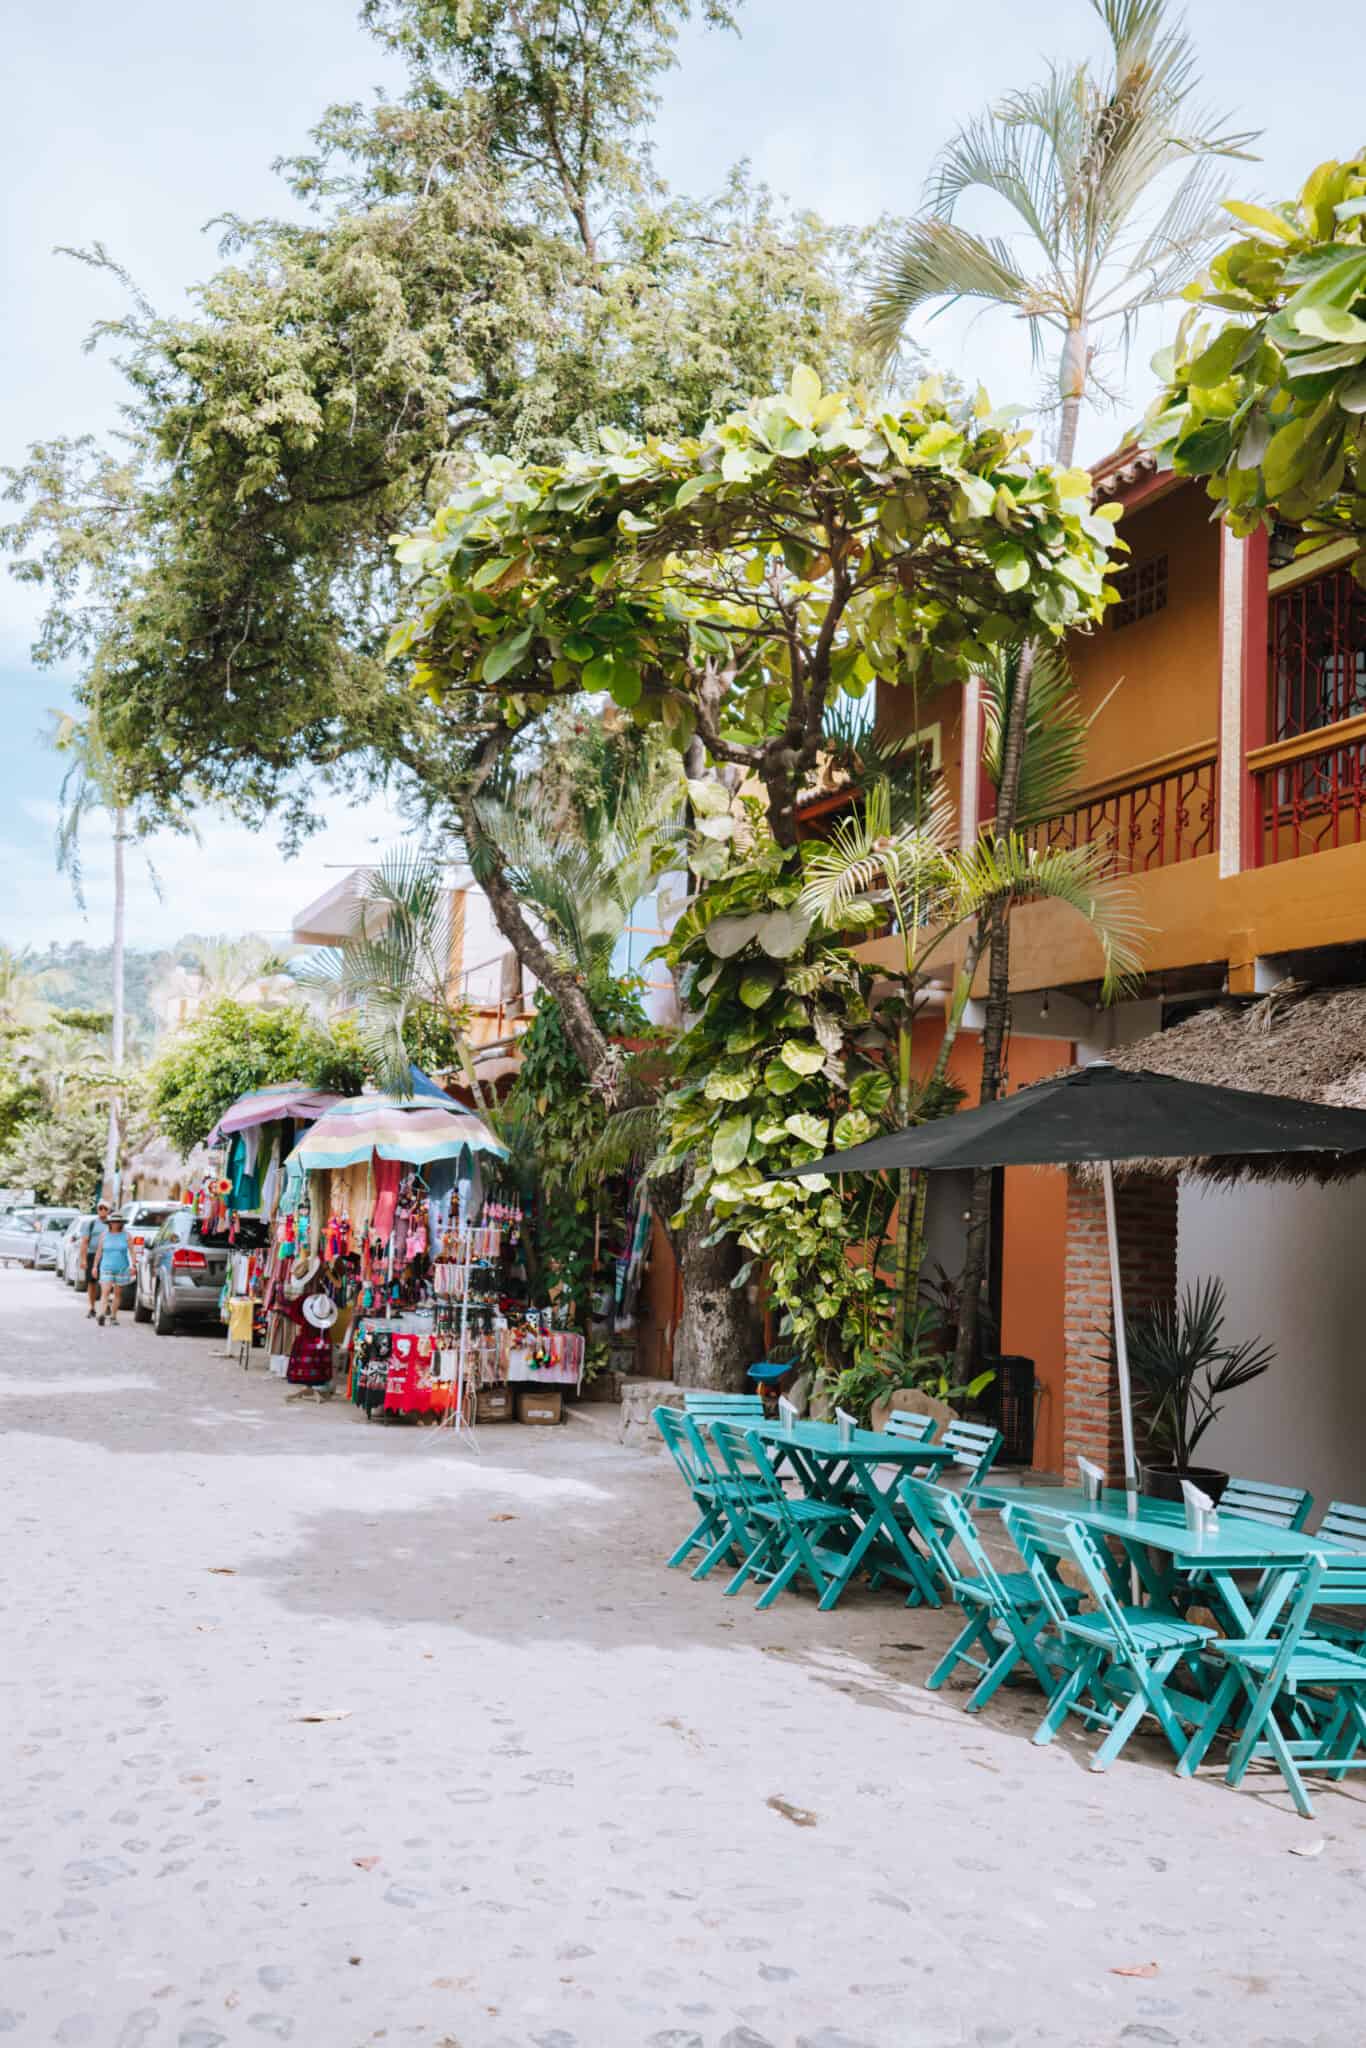 A row of tables and chairs on a street in Sayulita, Costa Rica.